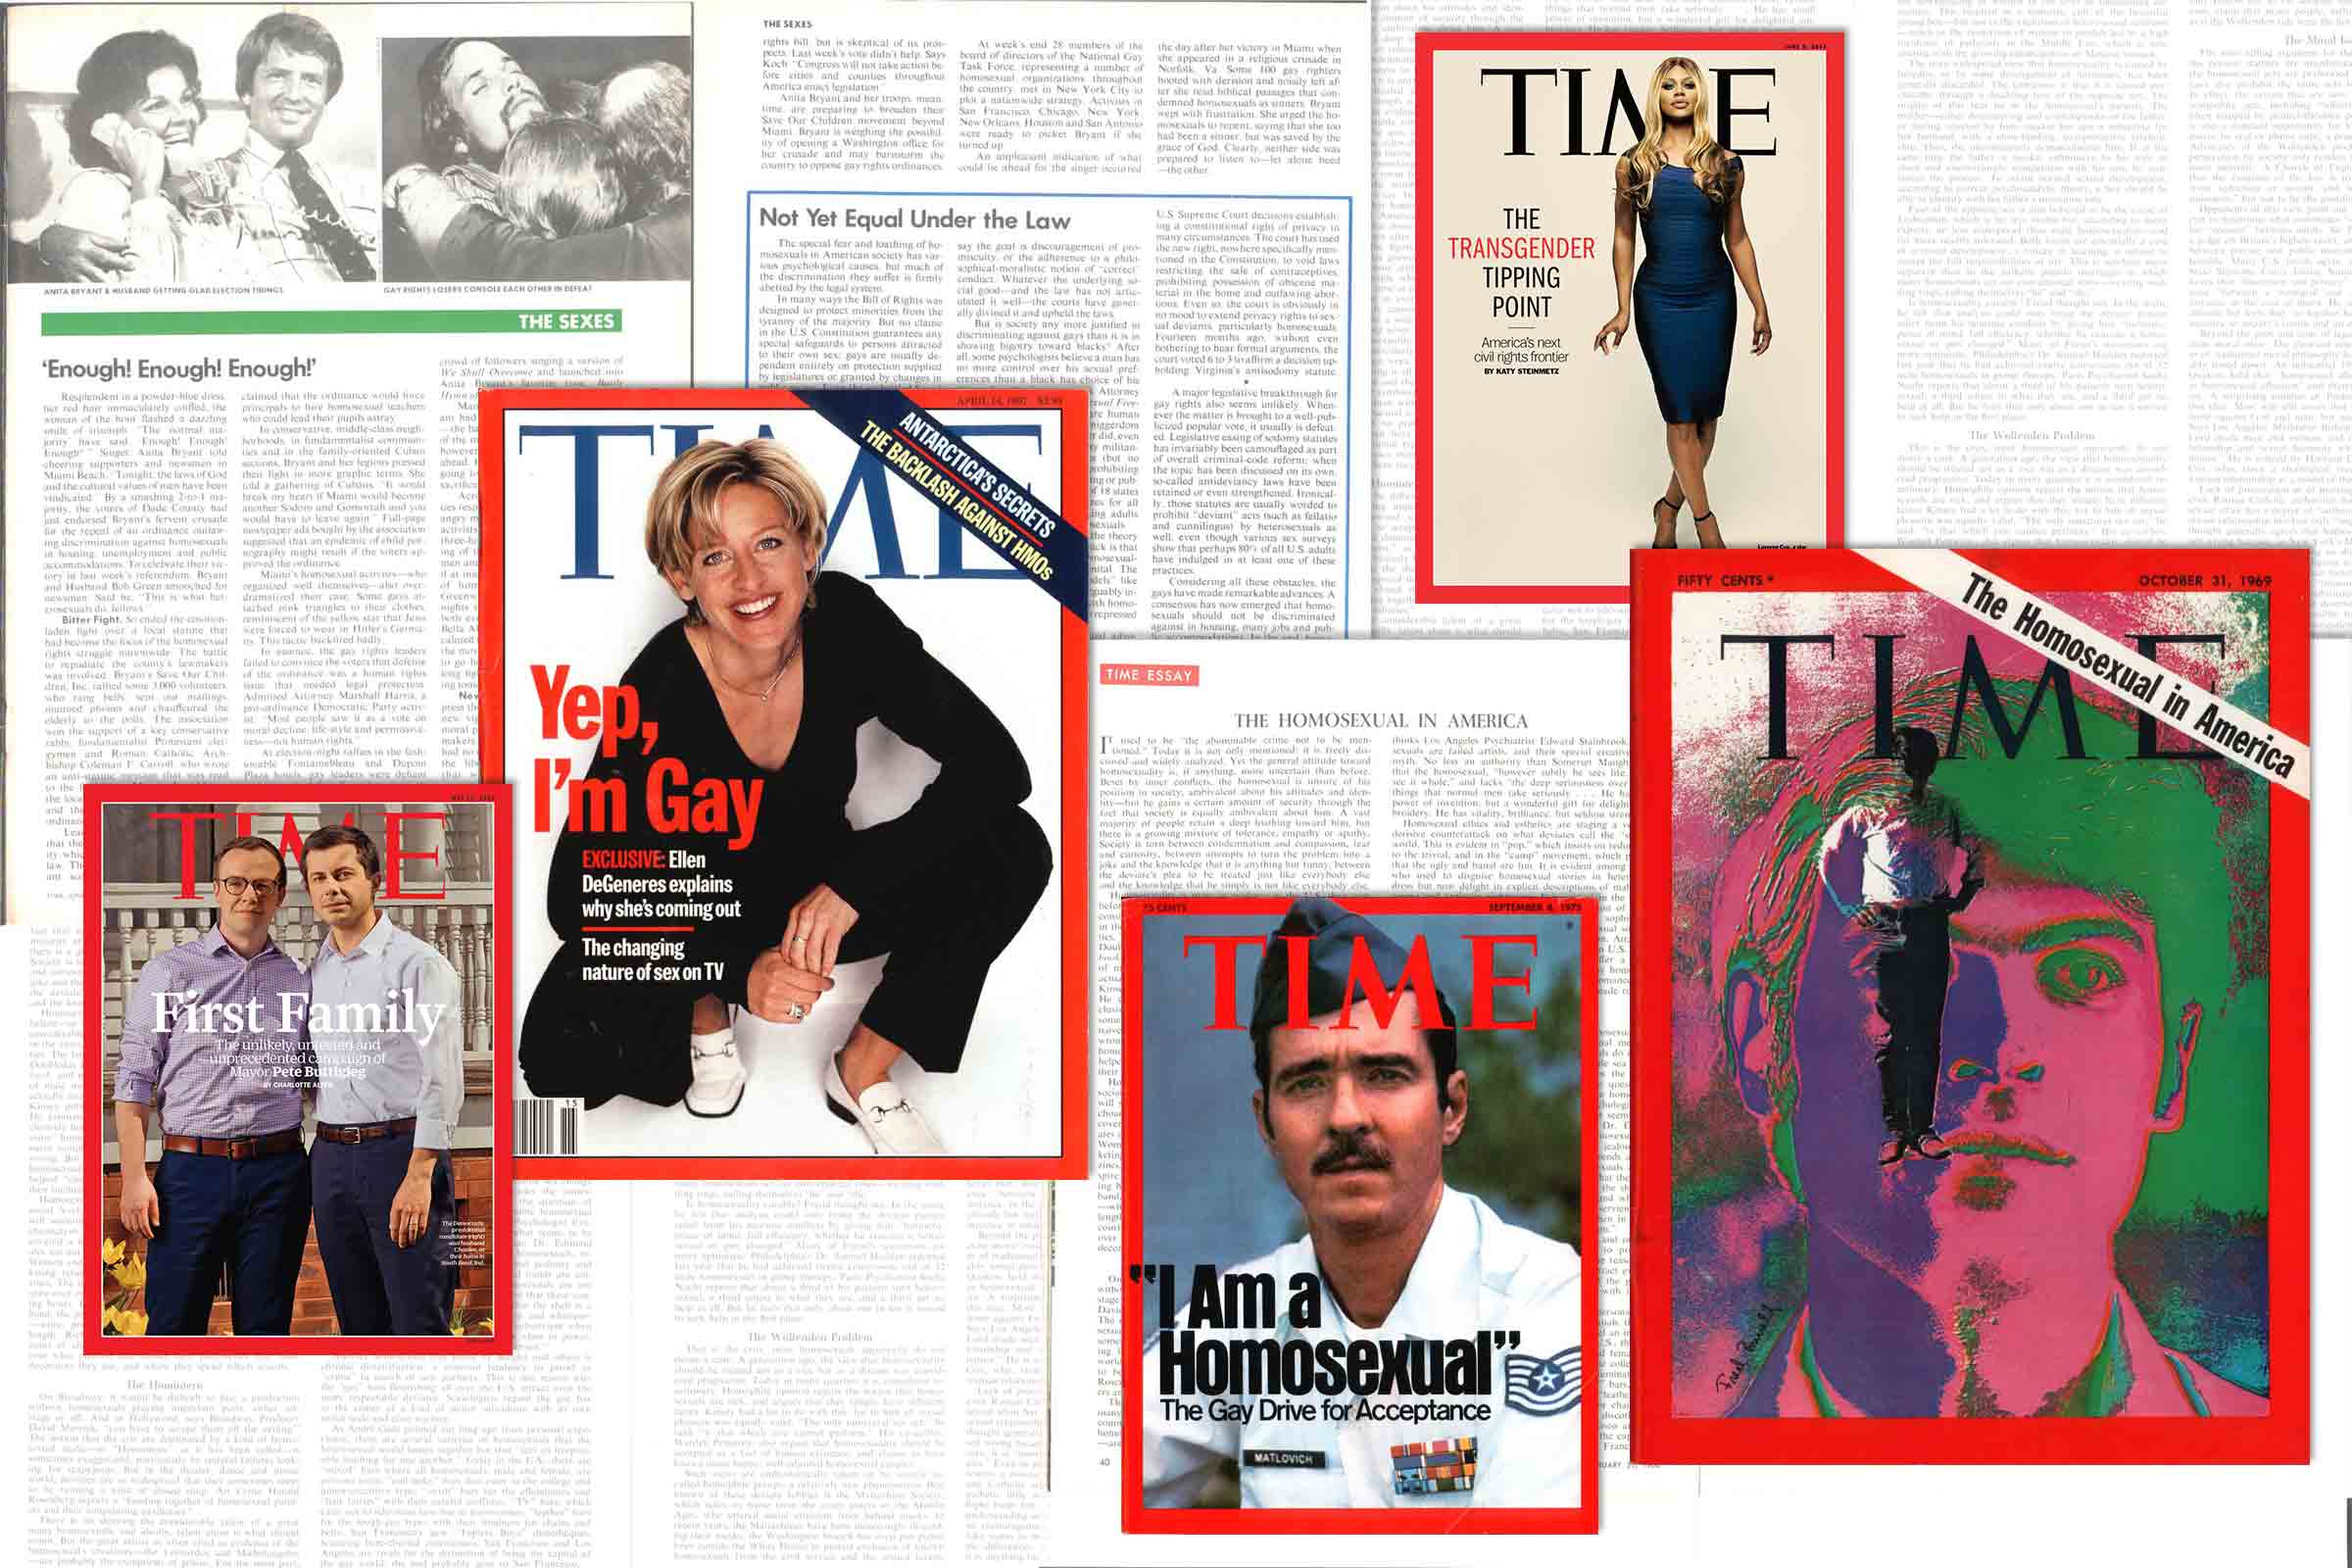 LGBTQ issues on the cover of TIME in (L-R) 2019, 1997, 1975, 2014 and 1969